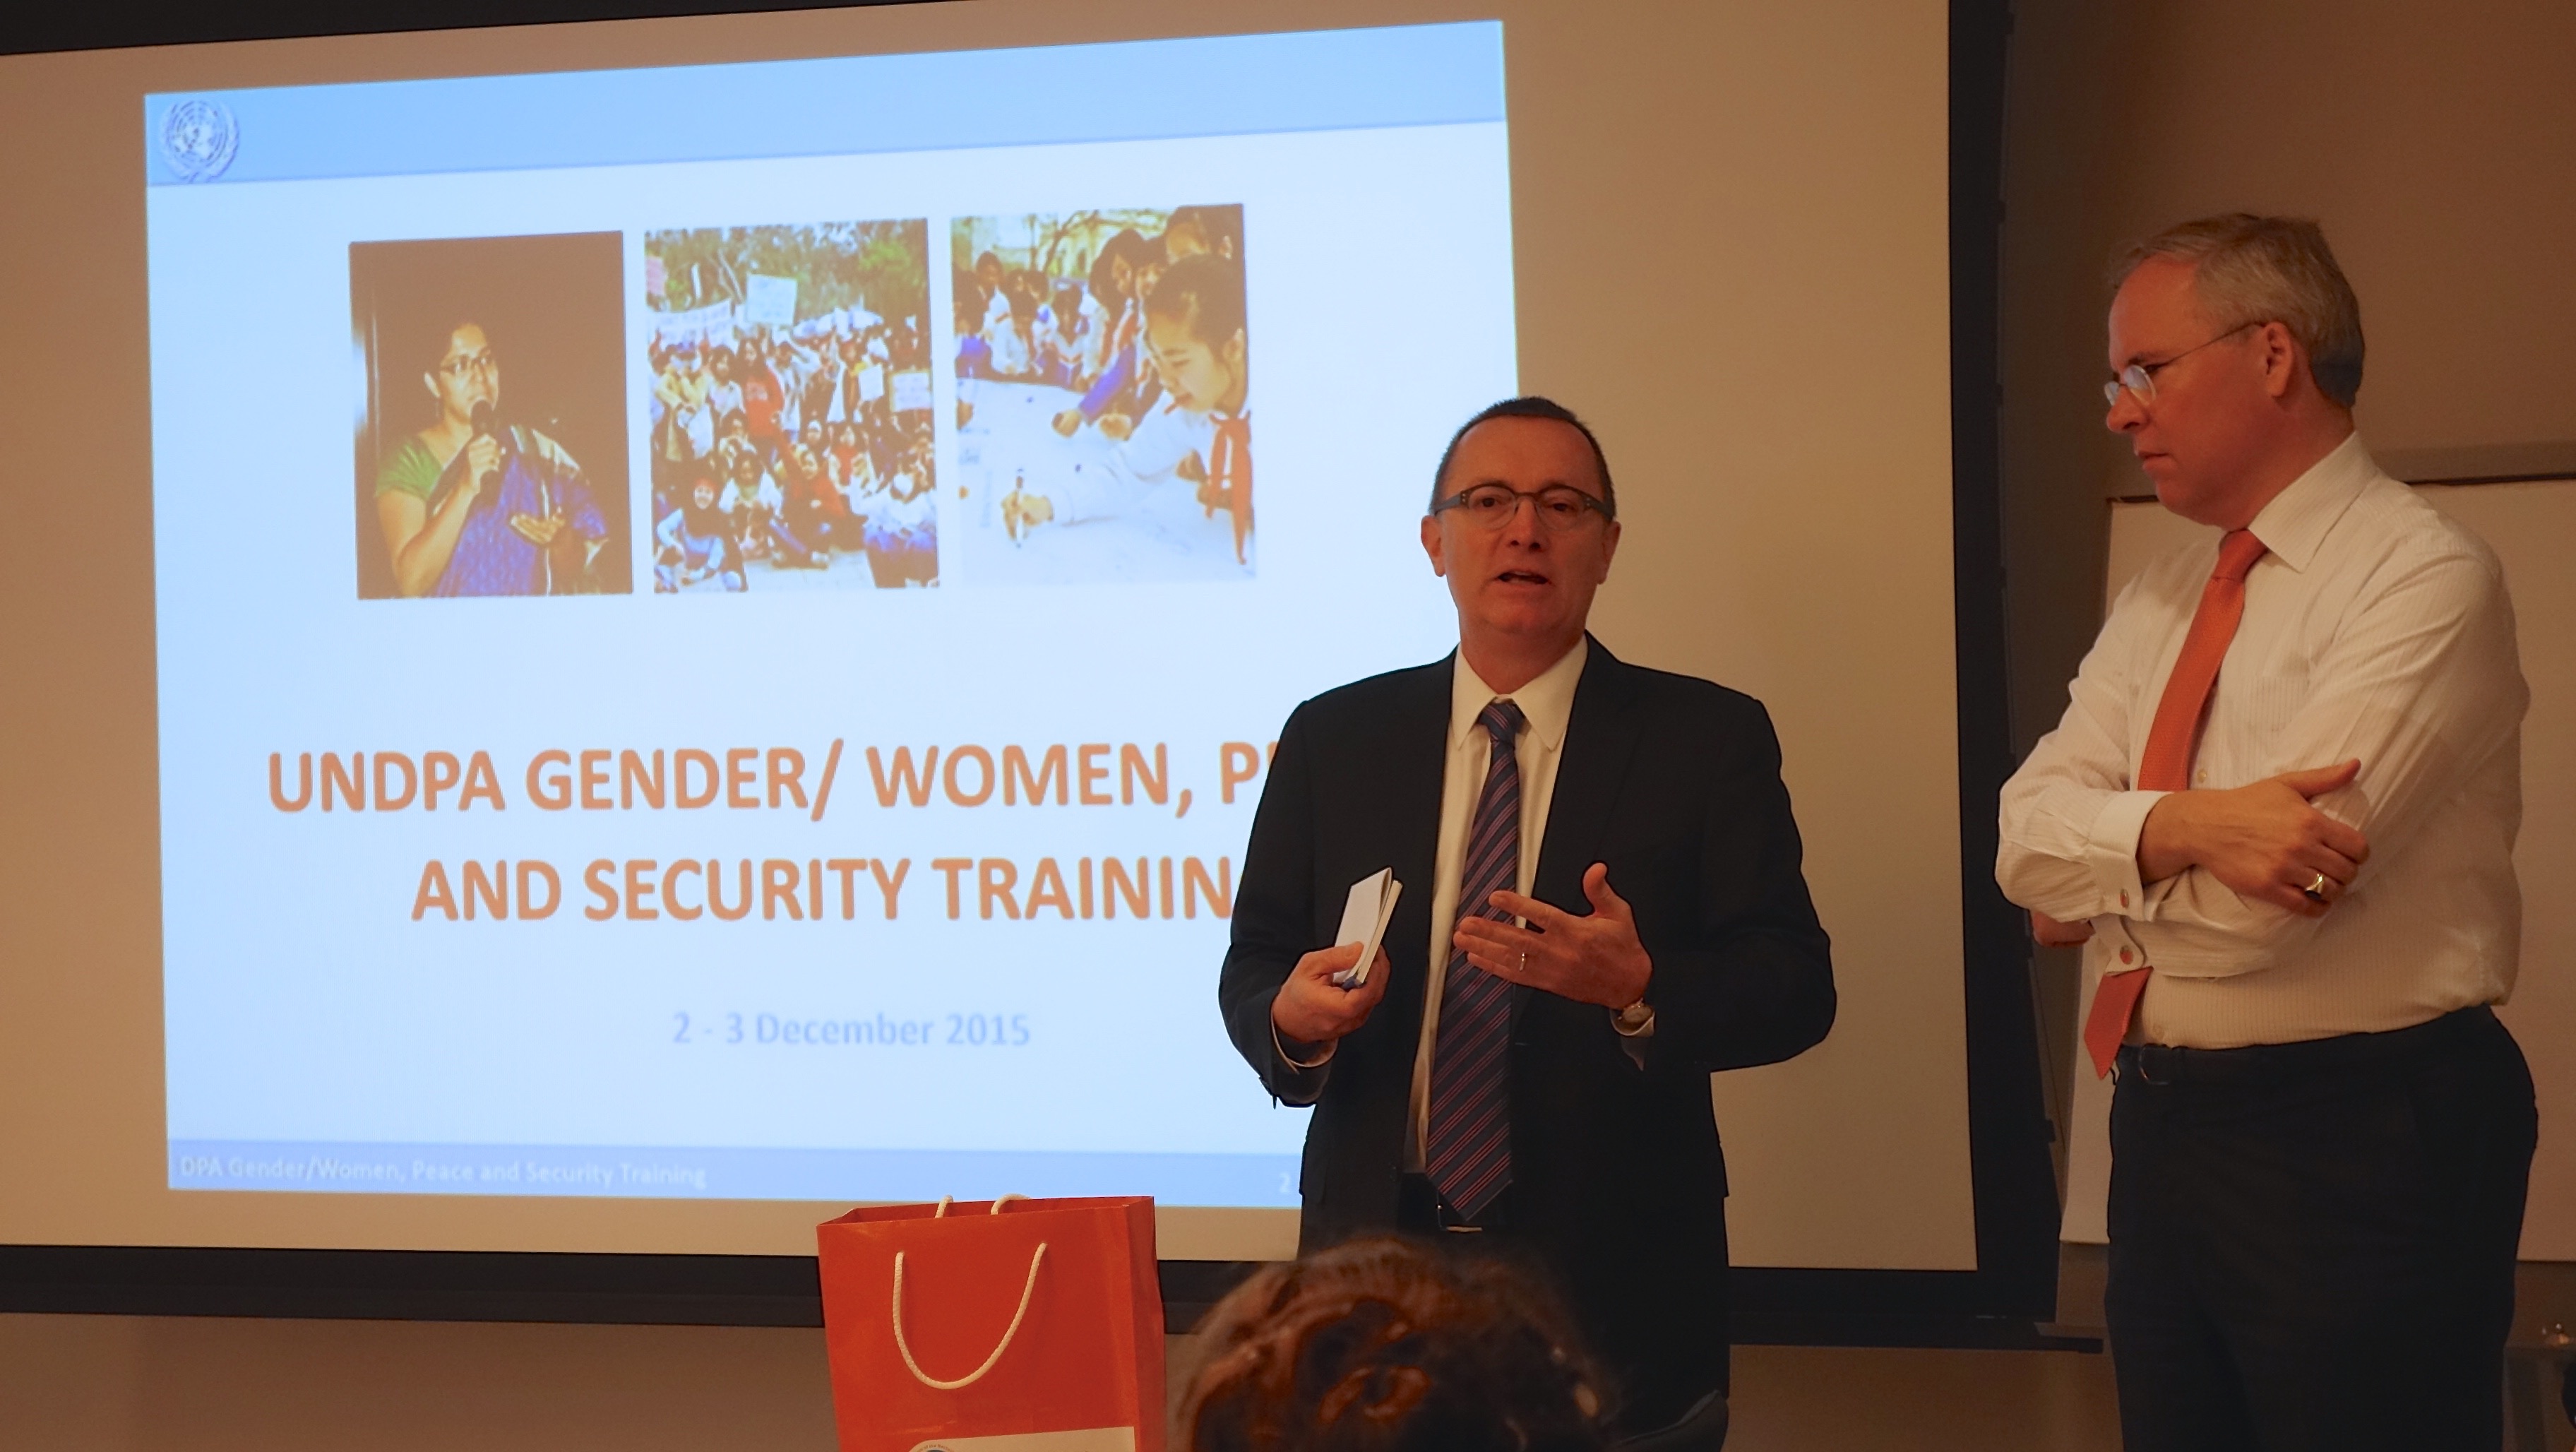 Under-Secretary-General Feltman welcoming participants to the DPA Gender/Women, Peace and Security staff training, hosted by Permanent Representative of the Netherlands Mr. Van Oosterom. Photo: UNDPA